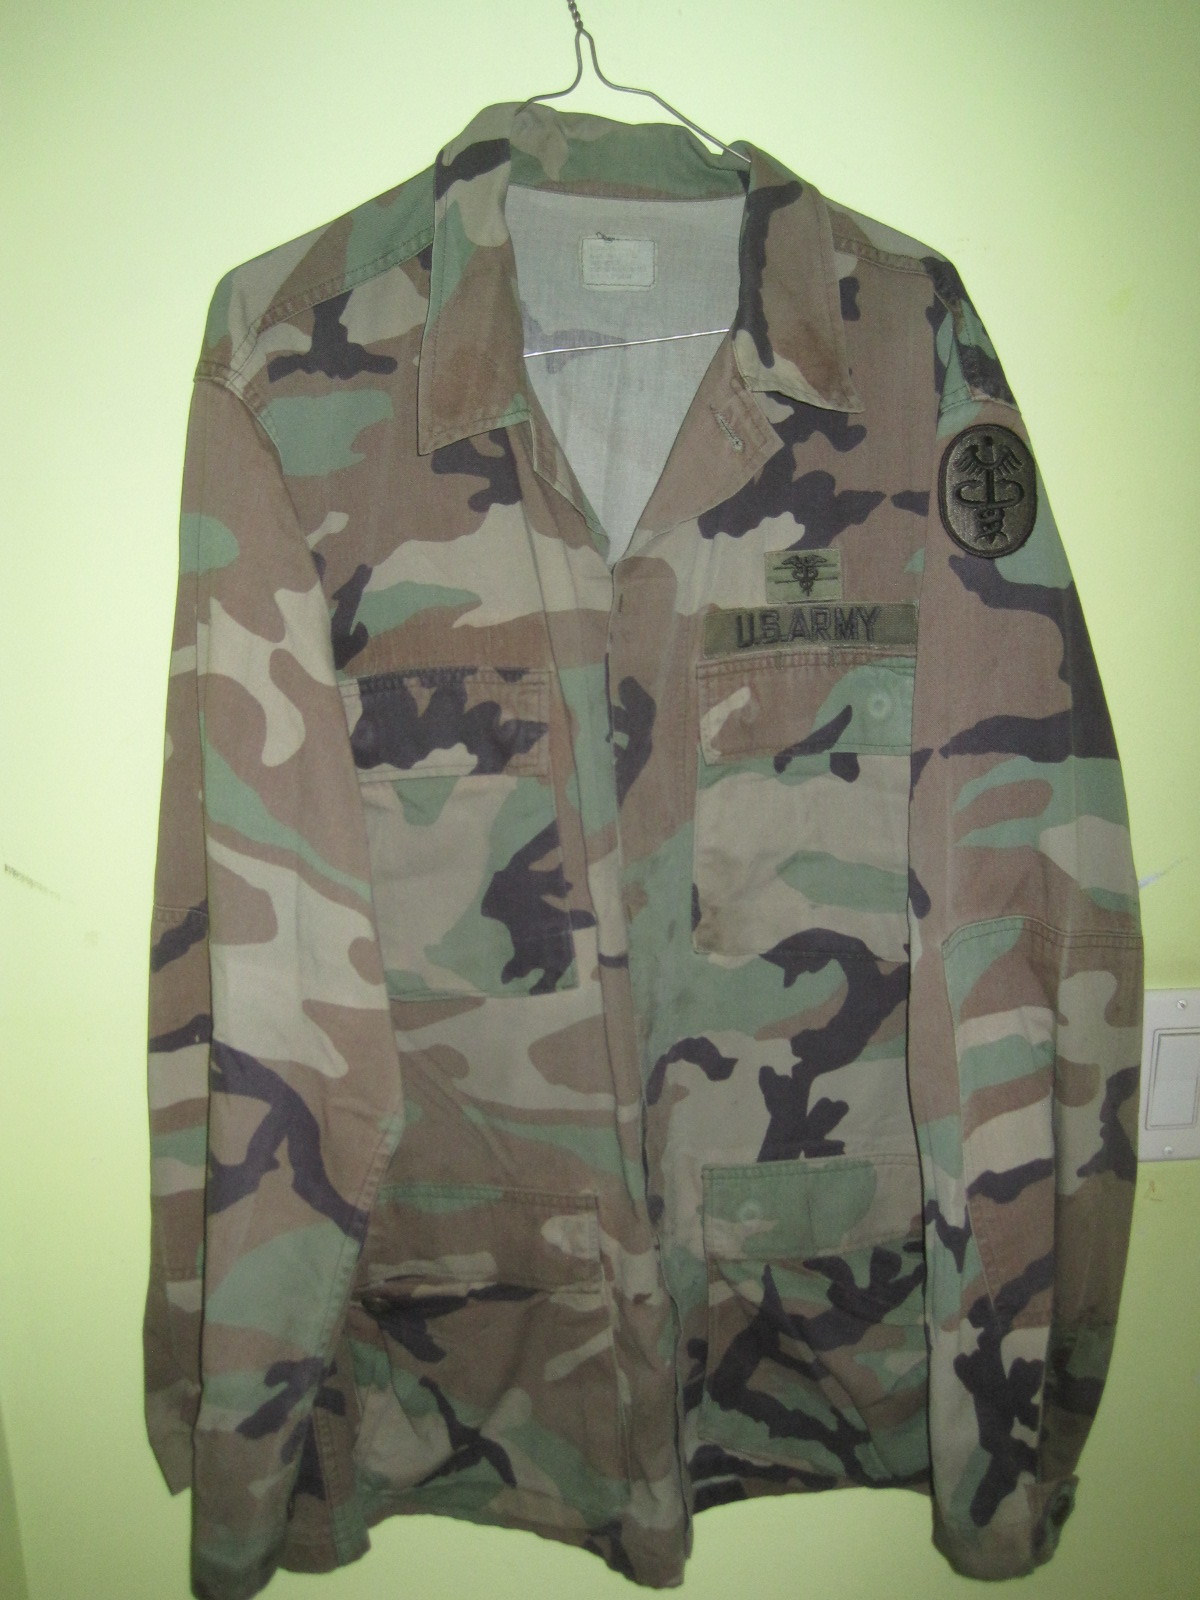 Primary image for Vintage 90s US Army Medical Command Doctor BDU Wodland Camouflage Uniform Tunic